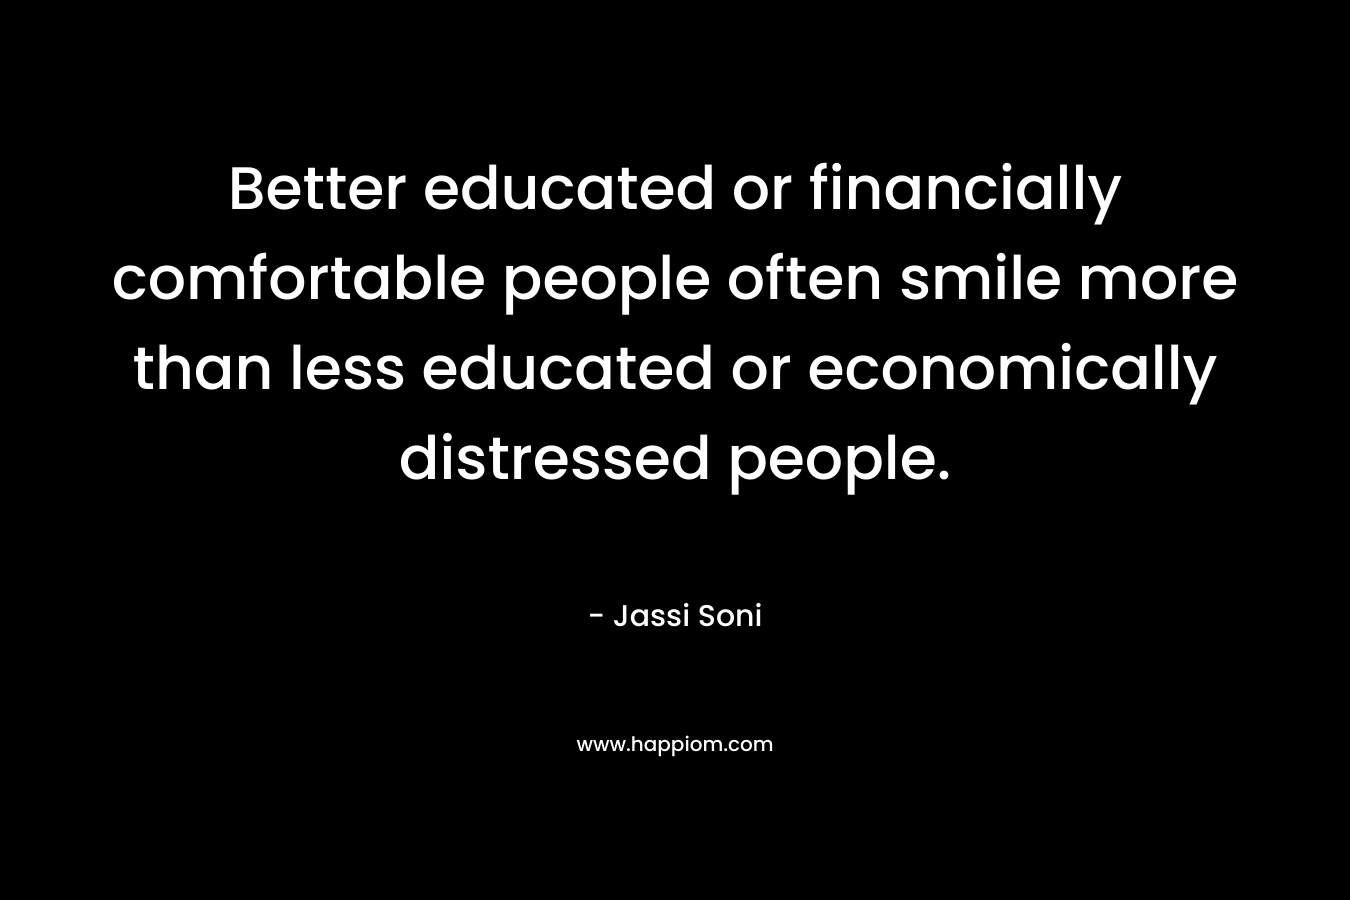 Better educated or financially comfortable people often smile more than less educated or economically distressed people.